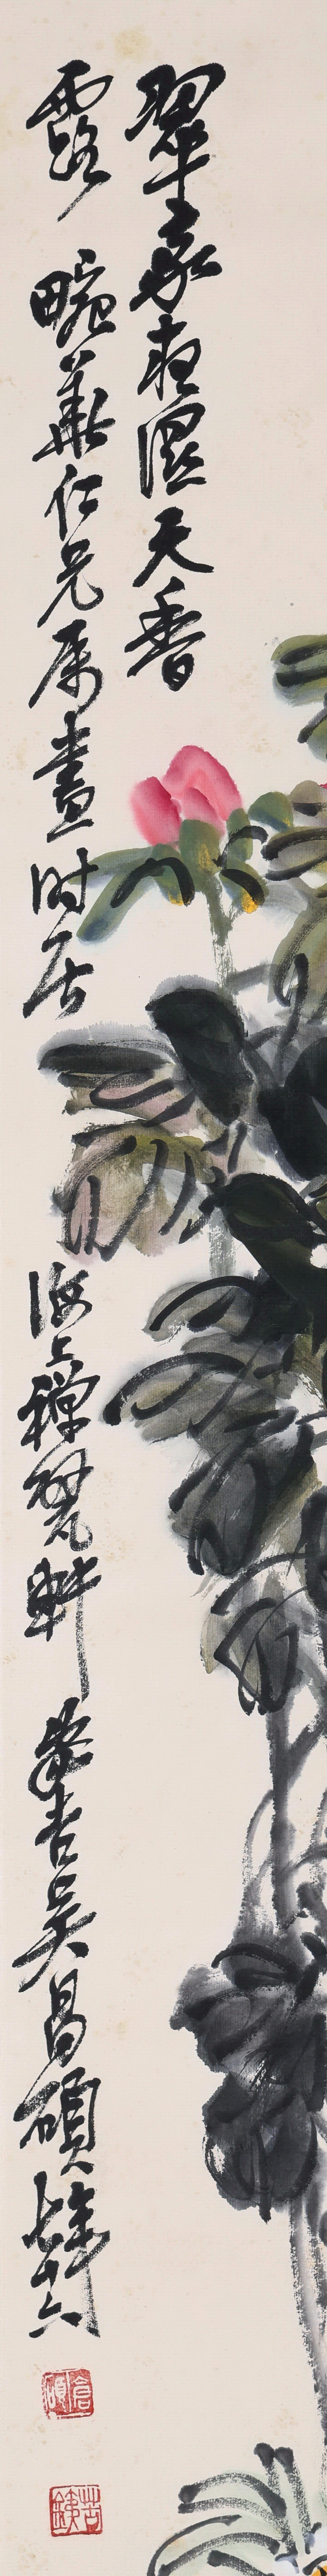 Four Pages of Chinese Scroll Painting Signed Wu Changshuo - Image 6 of 9